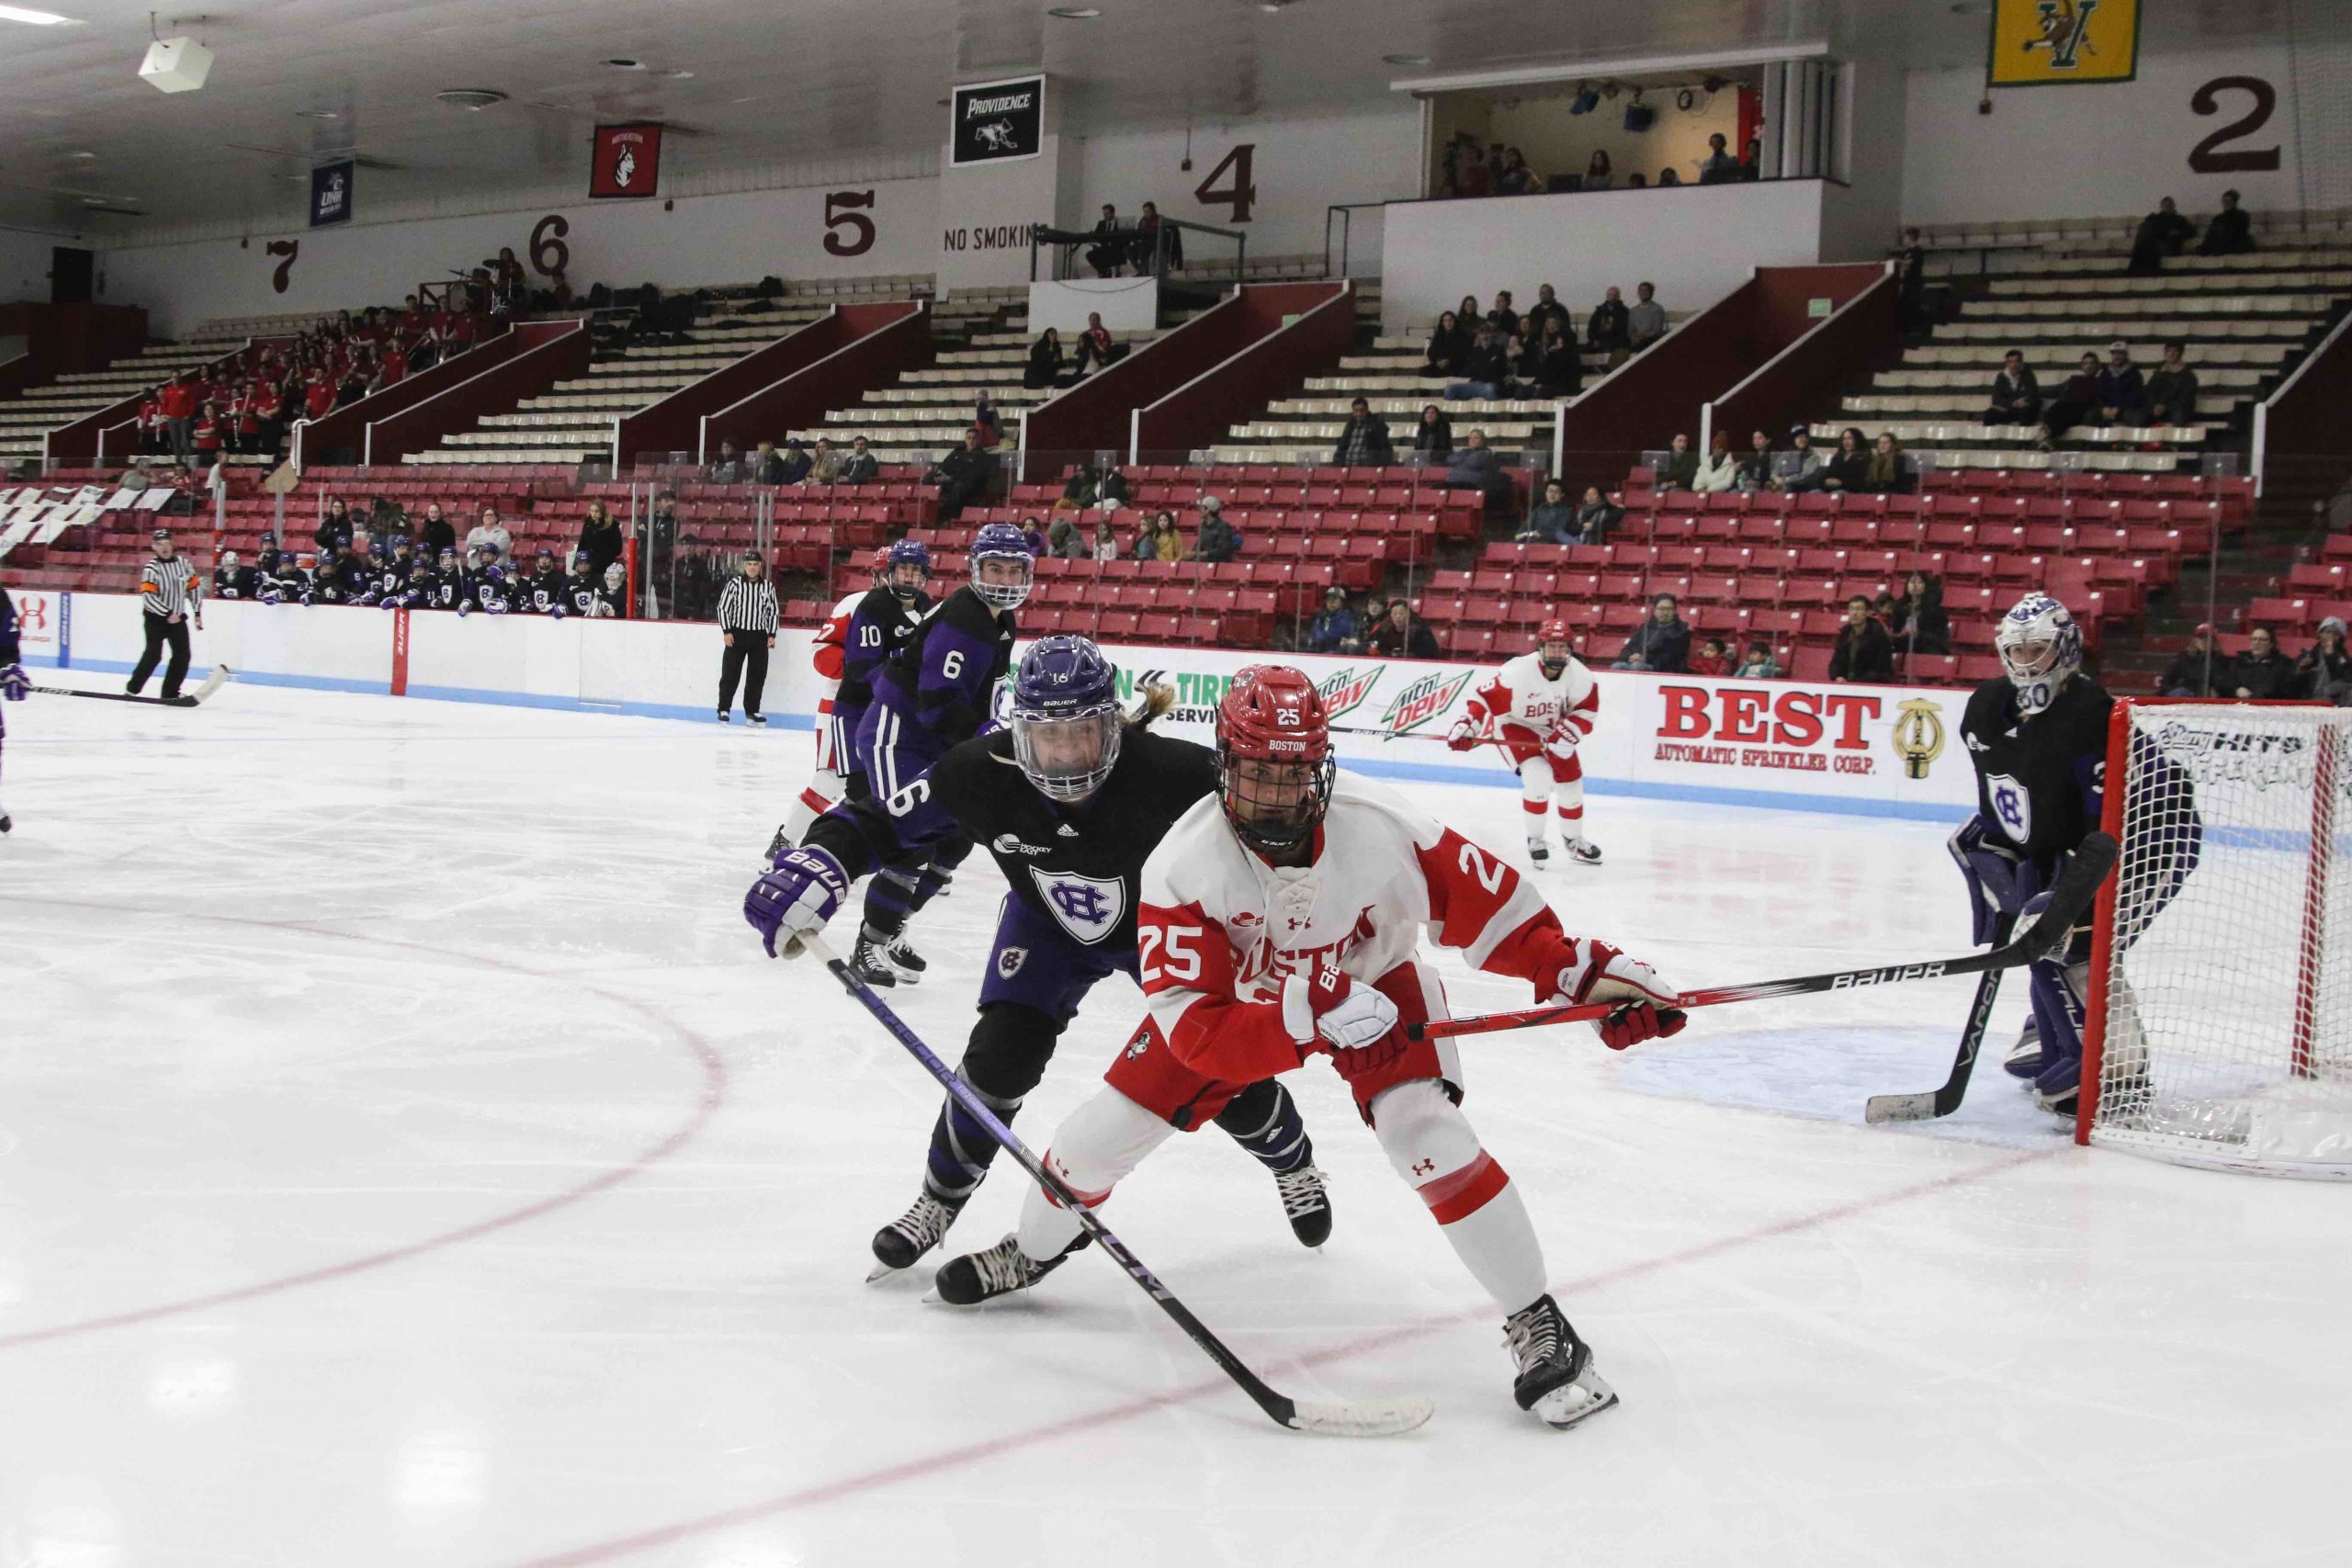 WIH to face Holy Cross in opening round of Hockey East Tournament